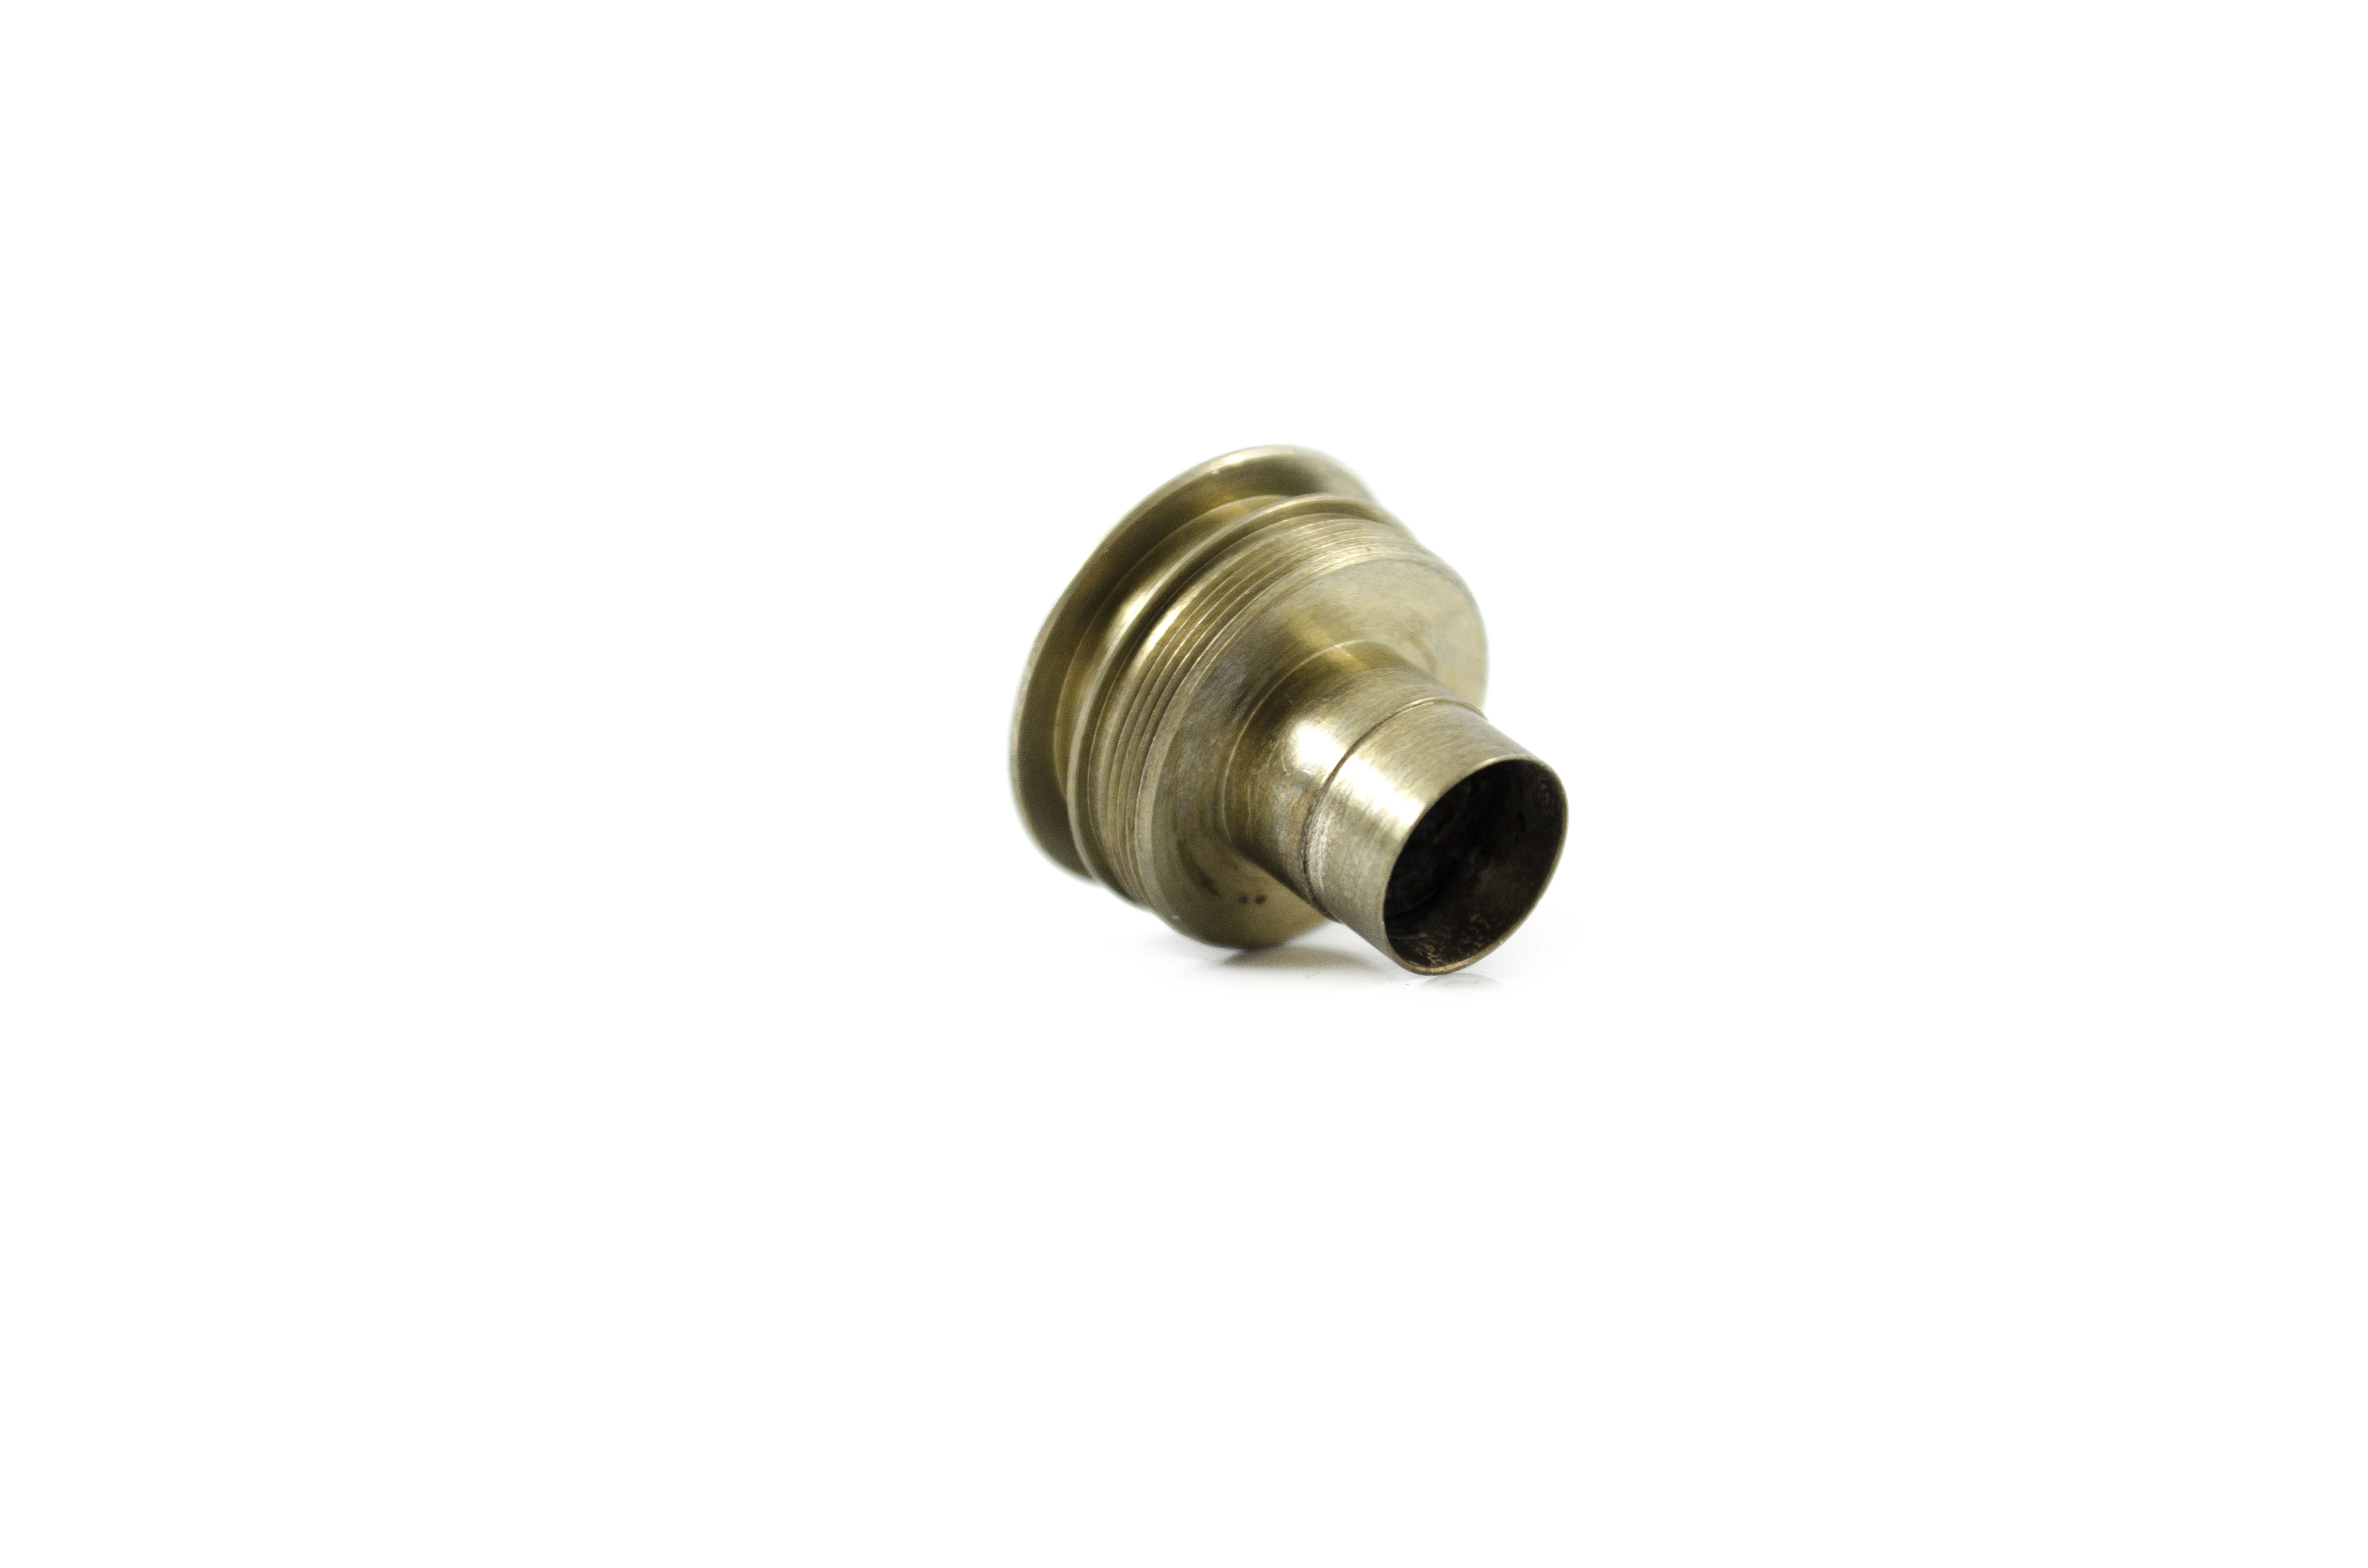 OEM Insertion Tube Proximal End Fitting - MH-908